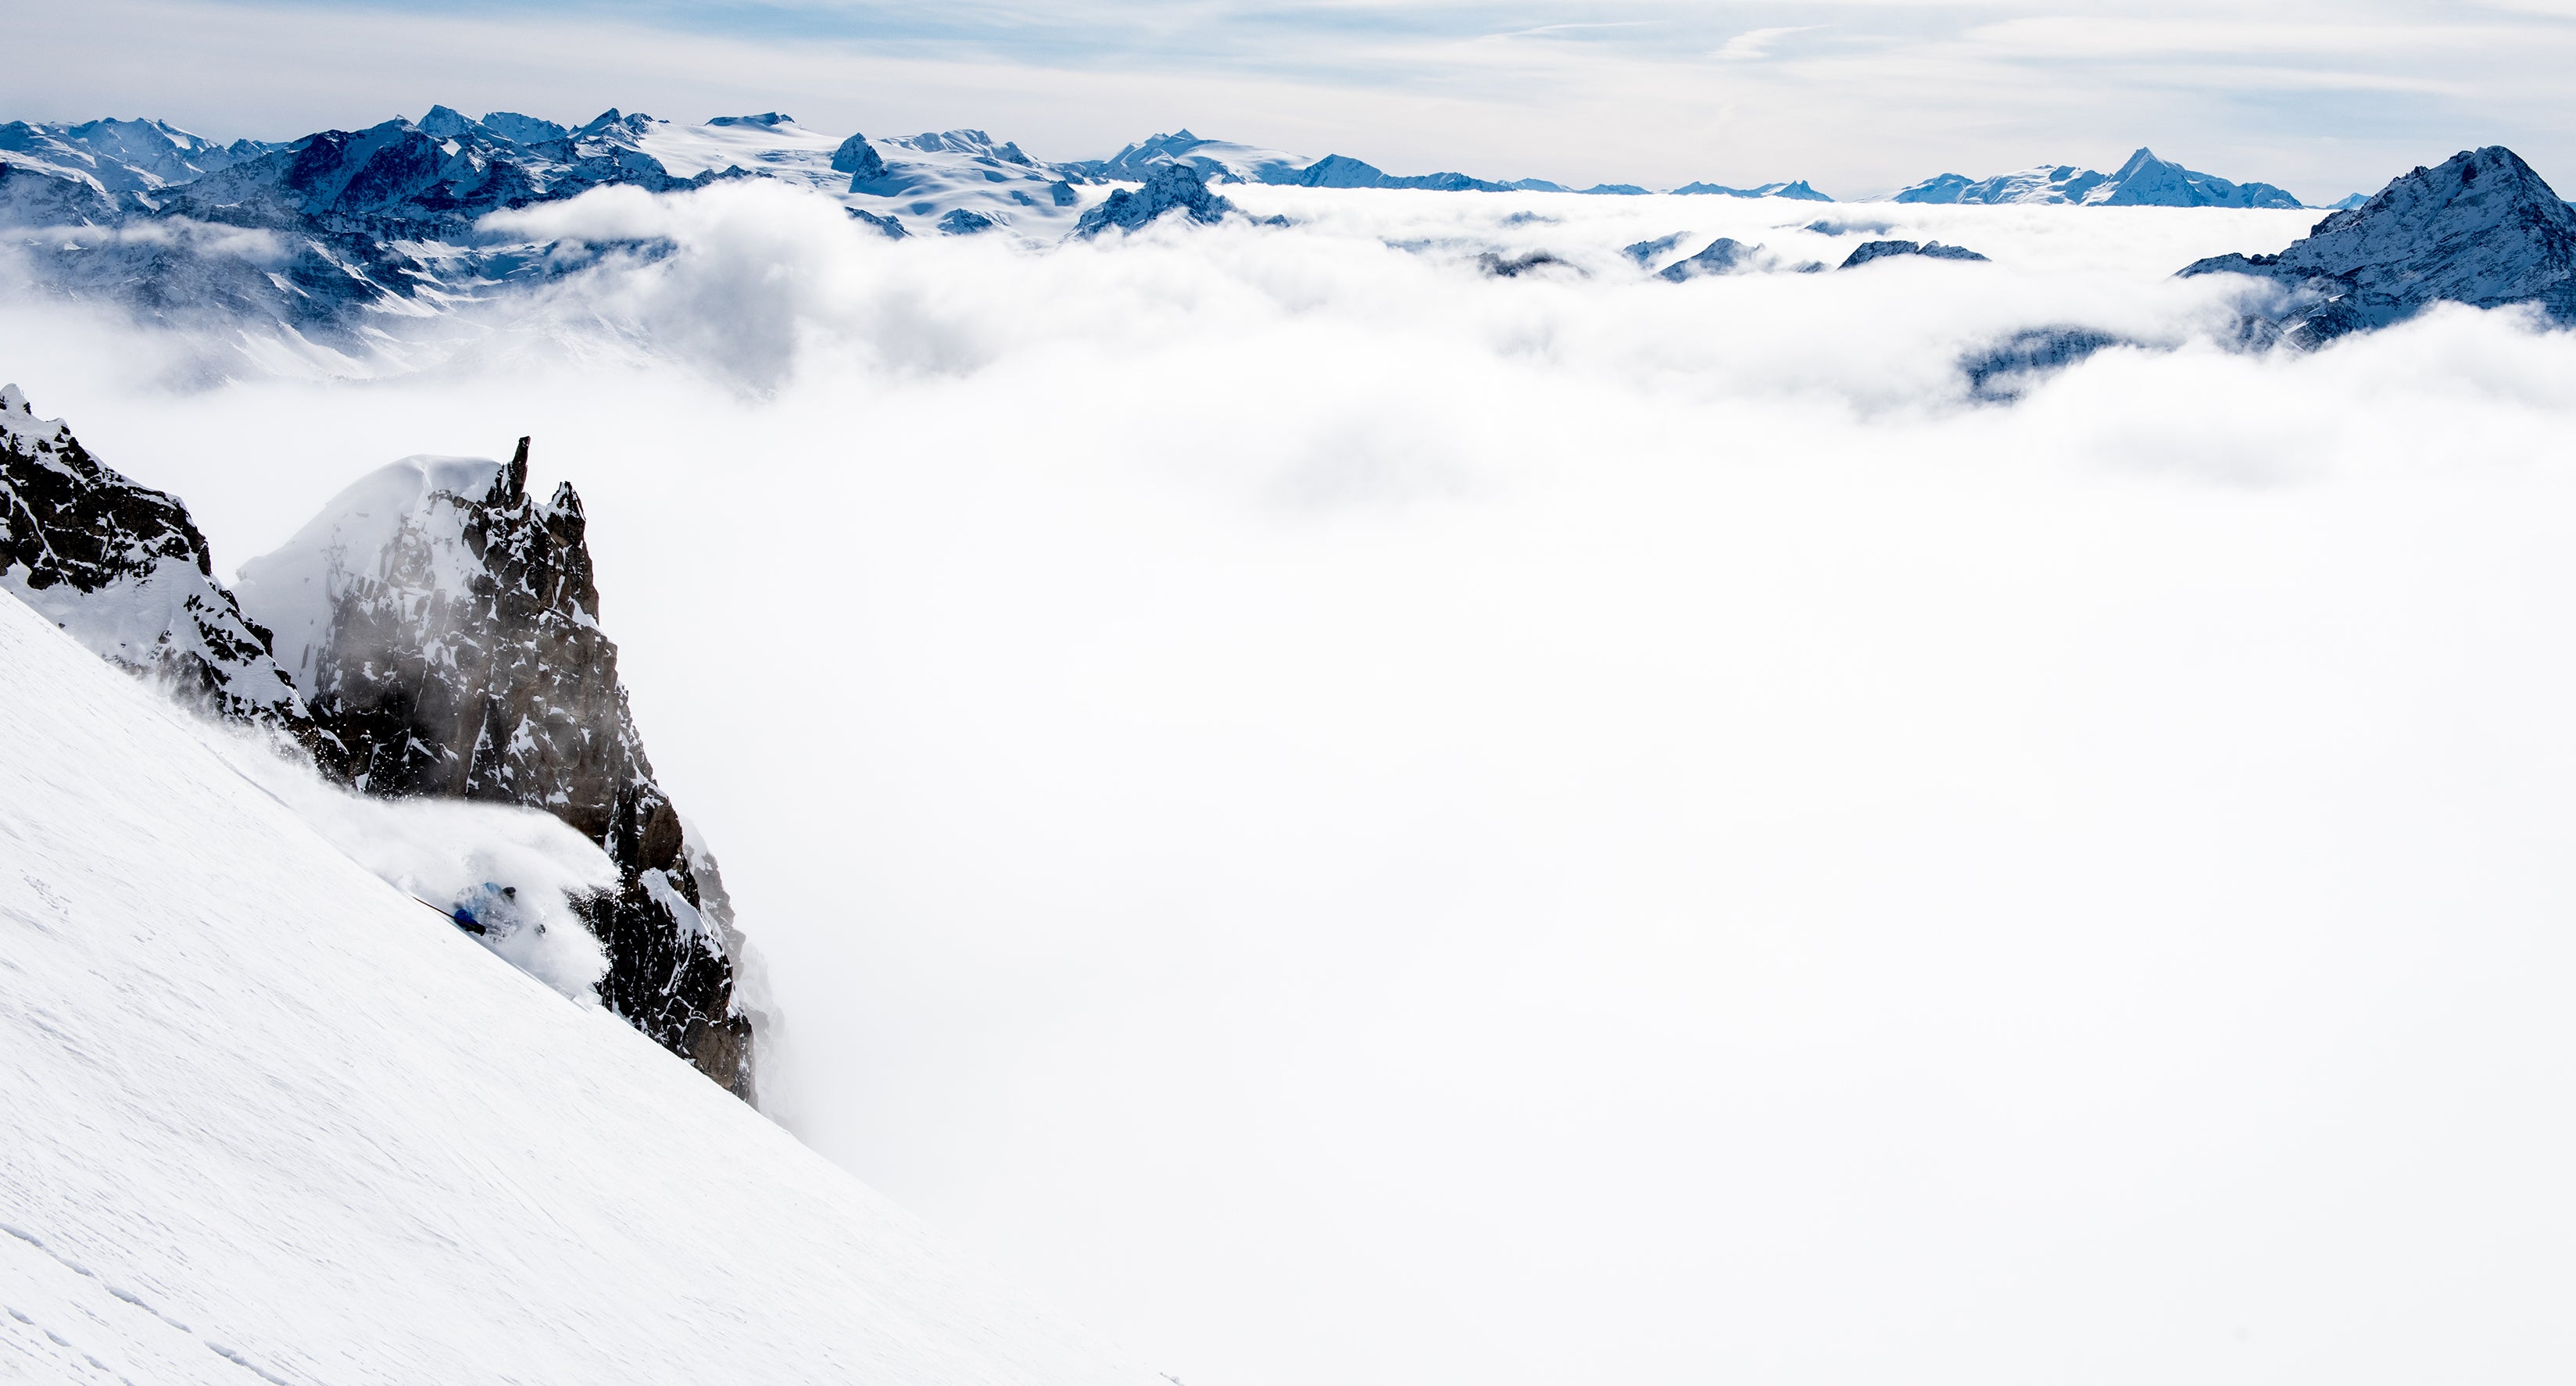 Skier turning above the cloud-covered Italian valley